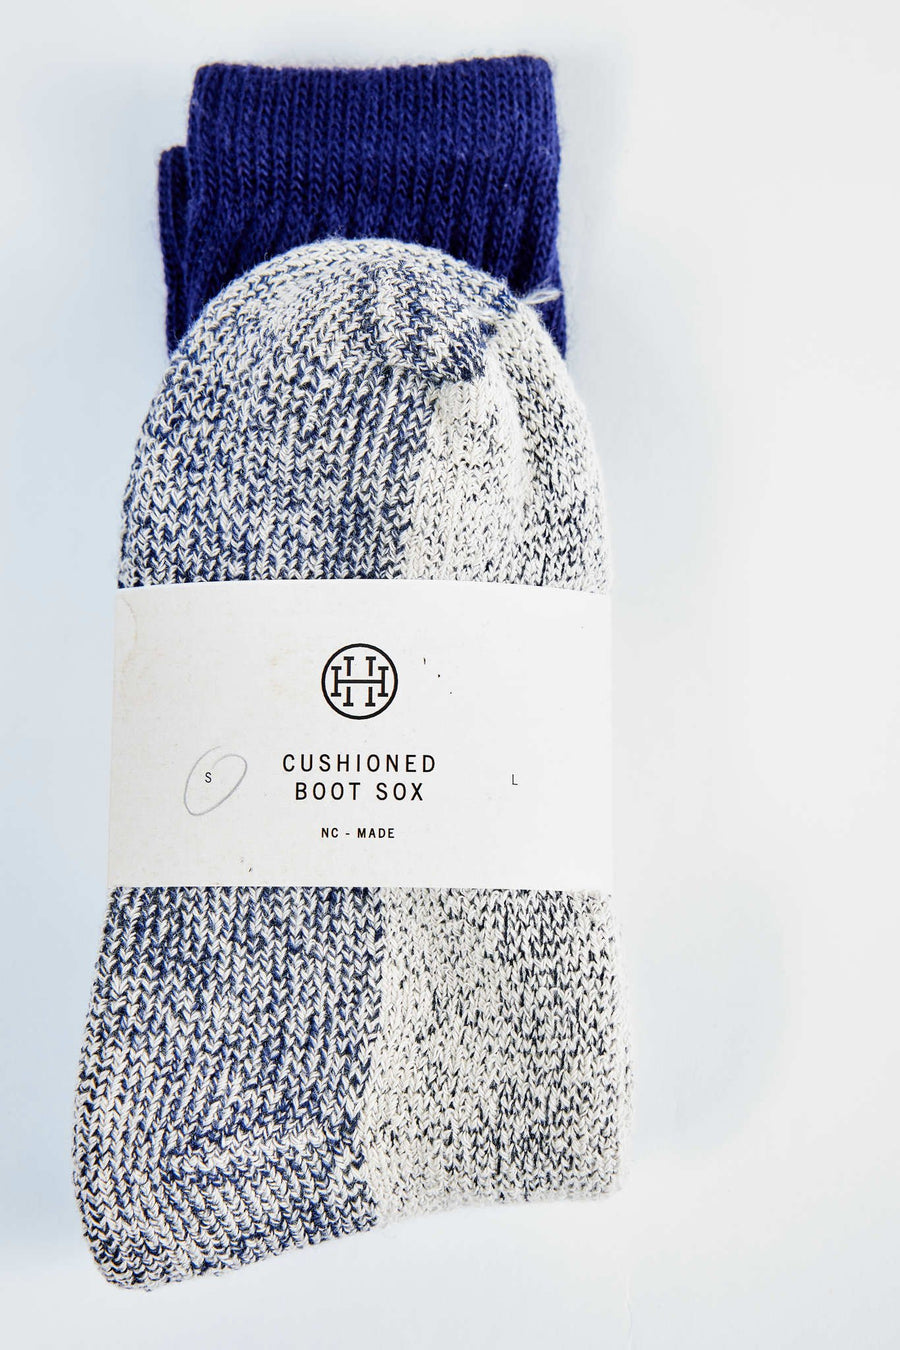 HH Classic Boot Sox for General Use - Navy - Hudson’s Hill